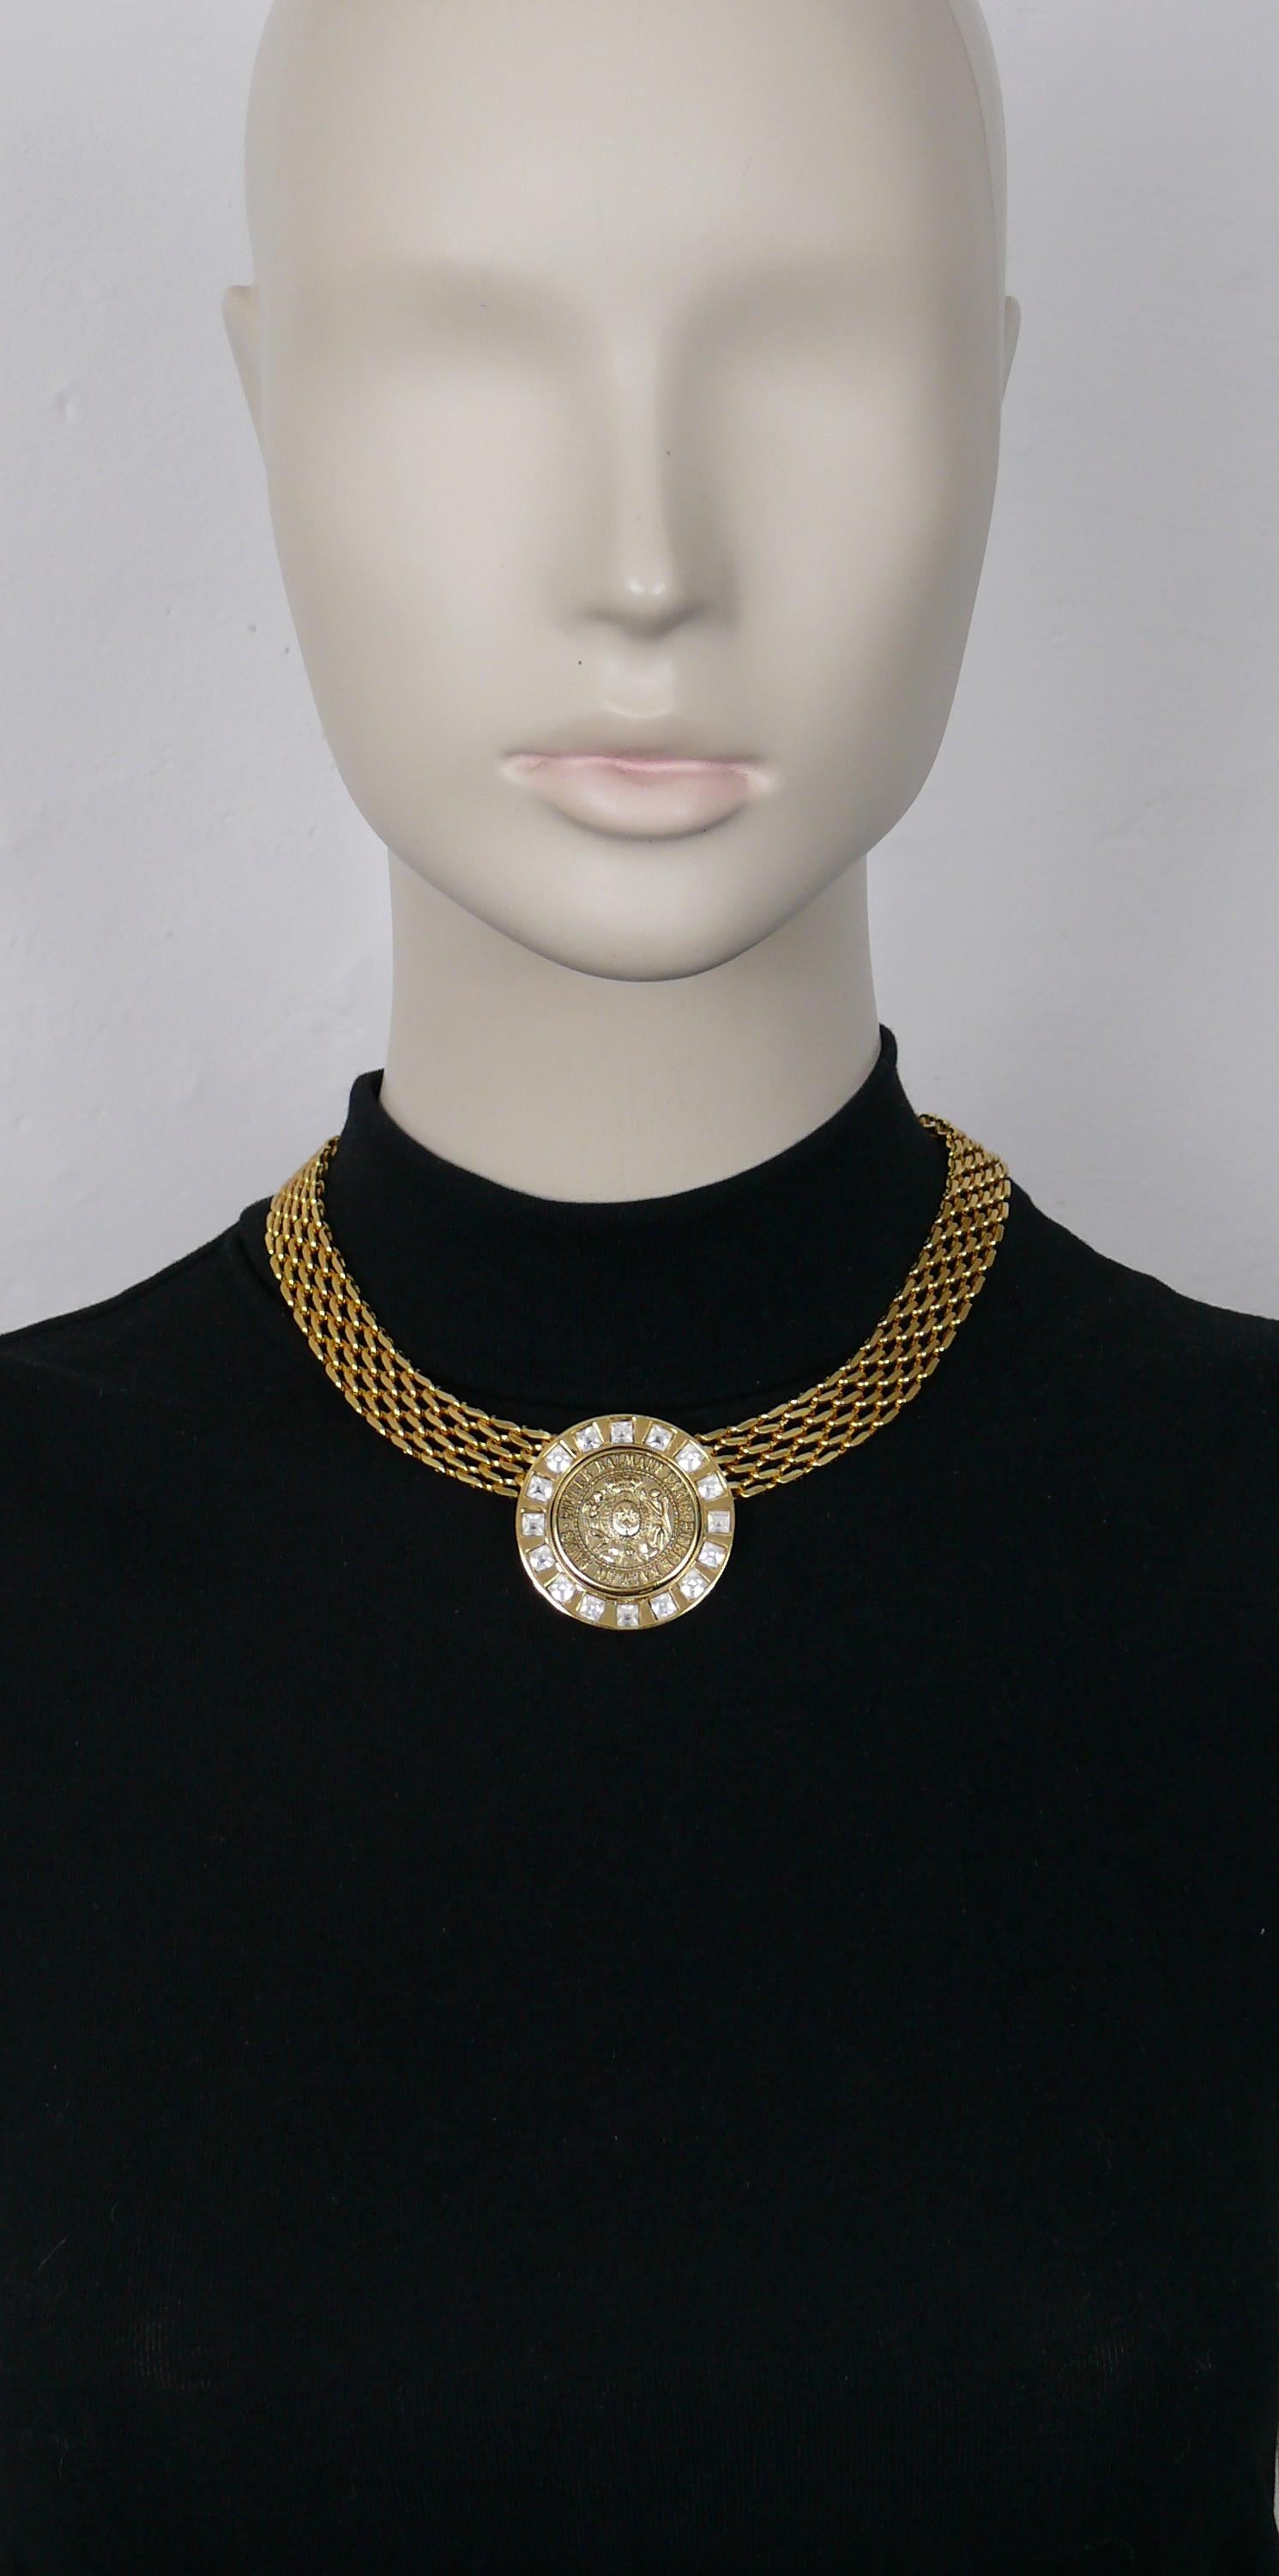 PIERRE BALMAIN vintage gold toned necklace featuring a PIERRE BALMAIN medallion crest at center embellished with clear crystals.

Secure clasp closure.

Embossed PB Paris.

Indicative measurements : length approx. 42.5 cm (16.73 inches) / chain